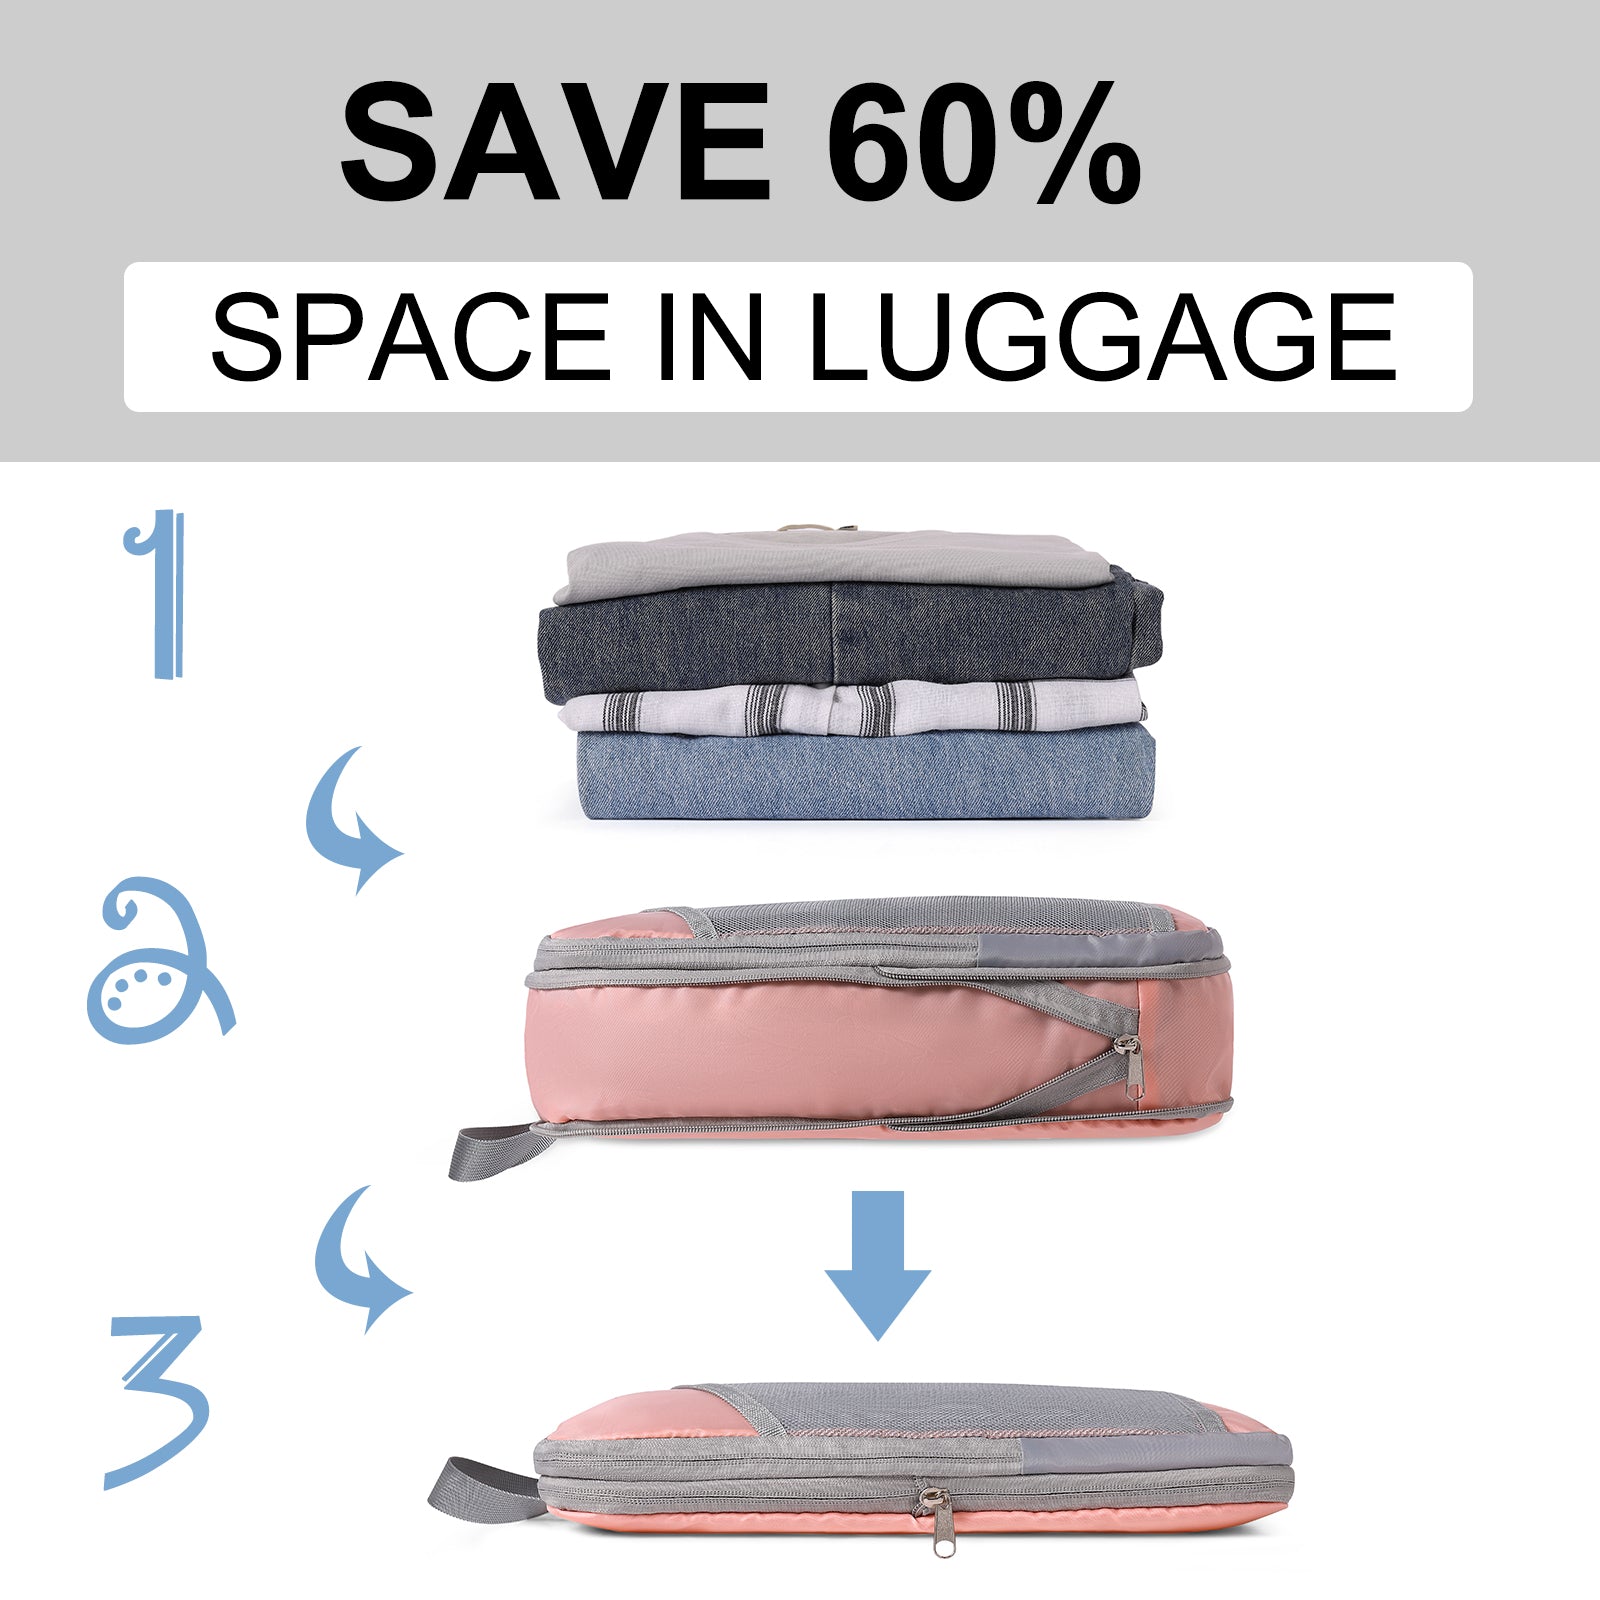 Compression Packing Cubes for Suitcase，CLUCI 4 Set Travel Essentials Organizer Bags for Luggage Travel Accessories